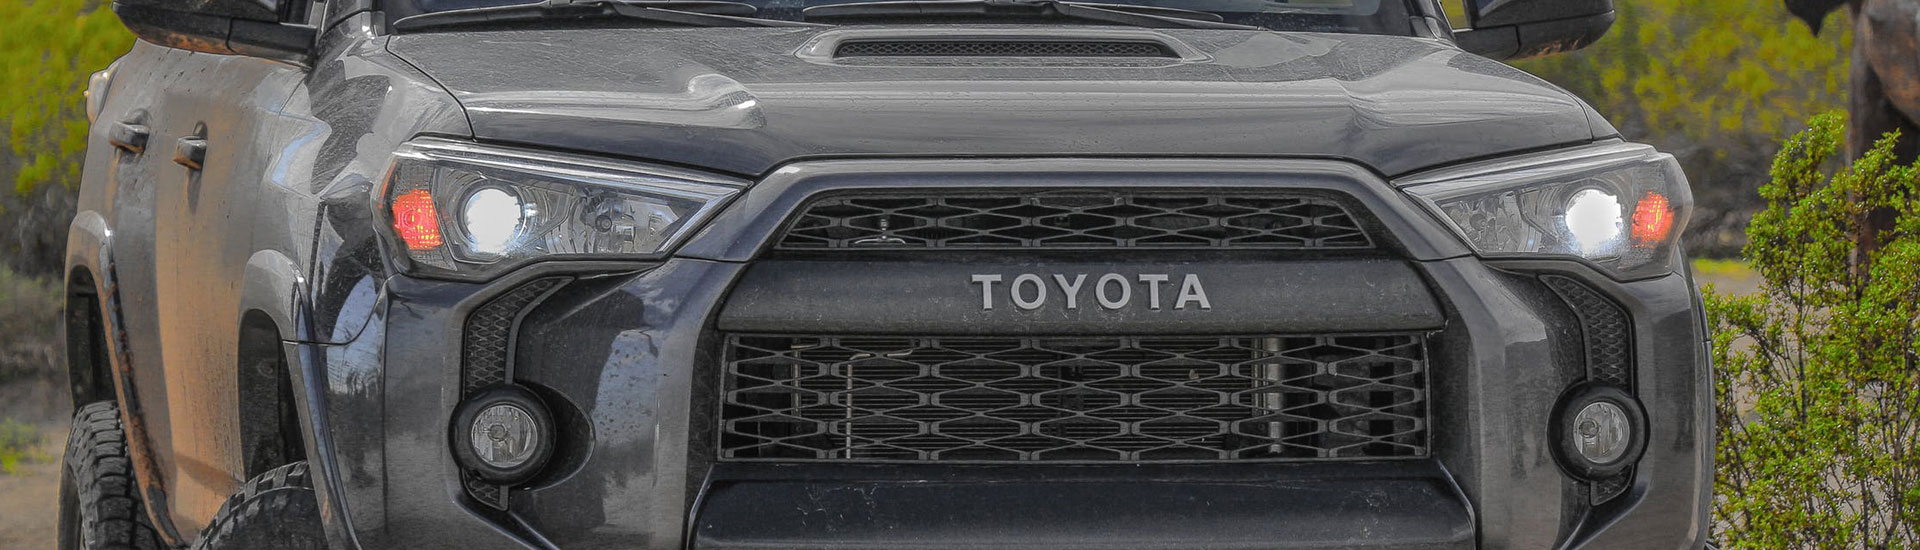 Toyota 4Runner Paint Protection Kits